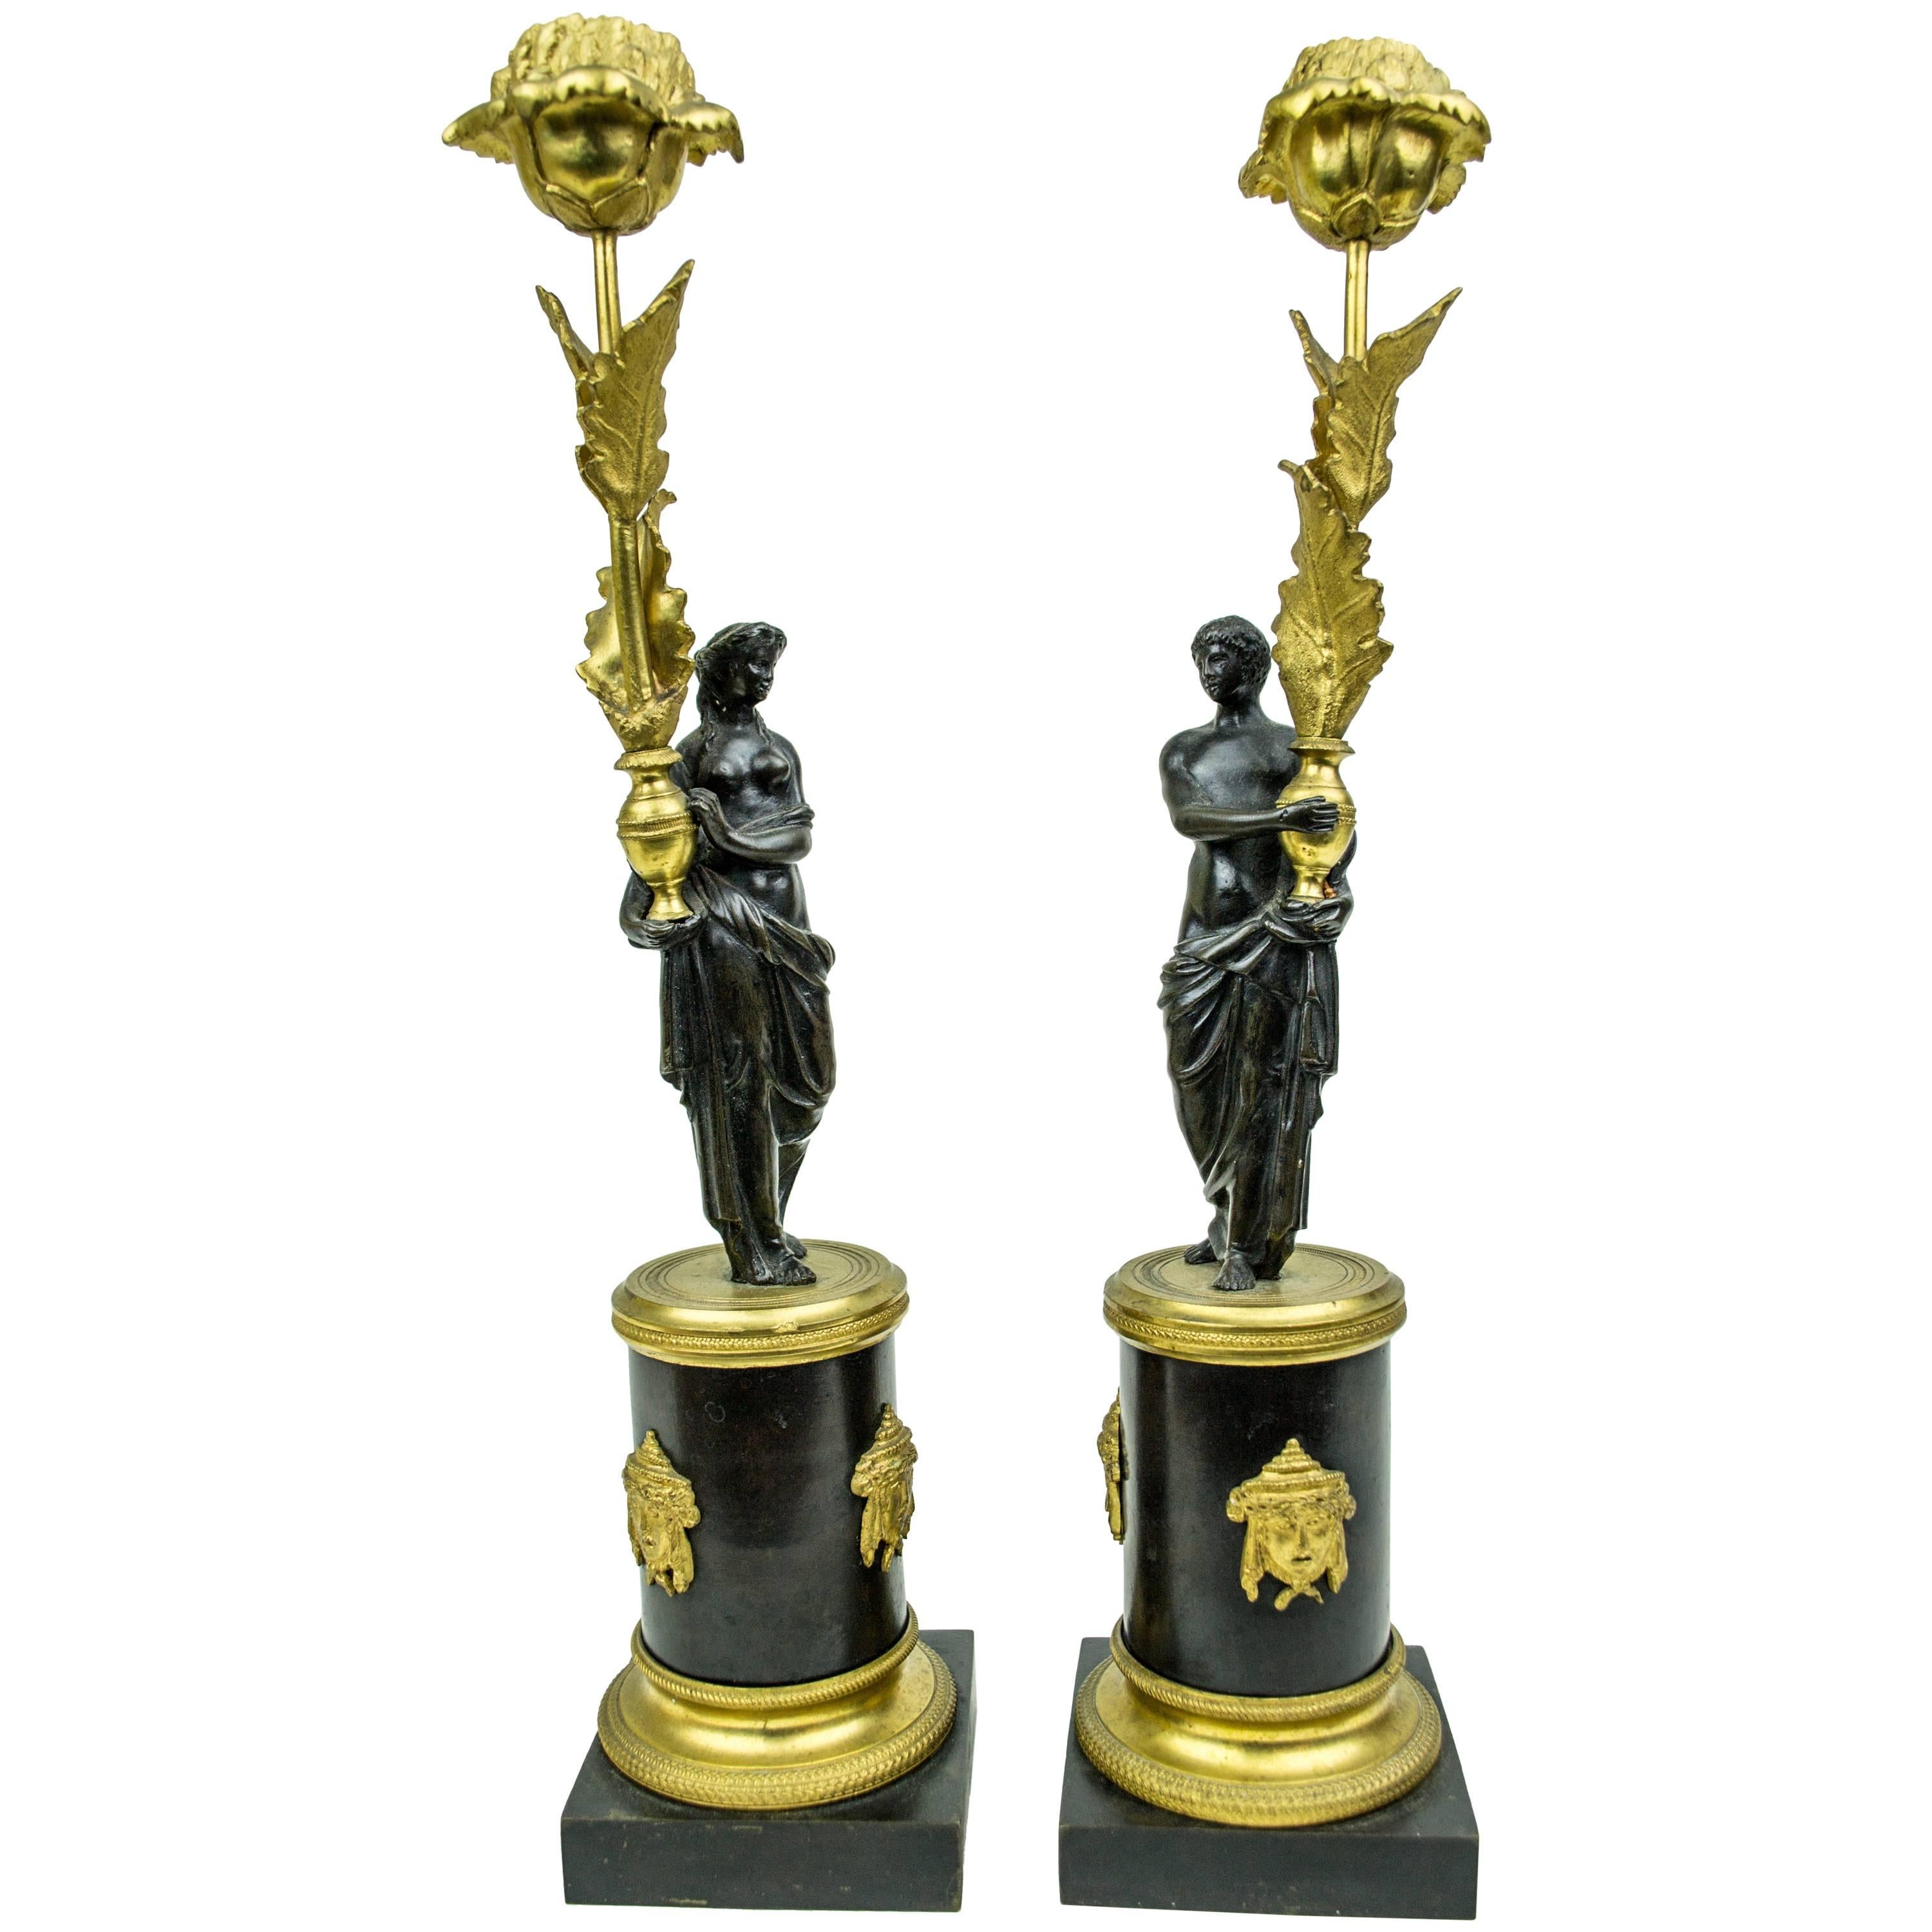 Pair of French Gilt and Patinated Bronze Figural Candlesticks